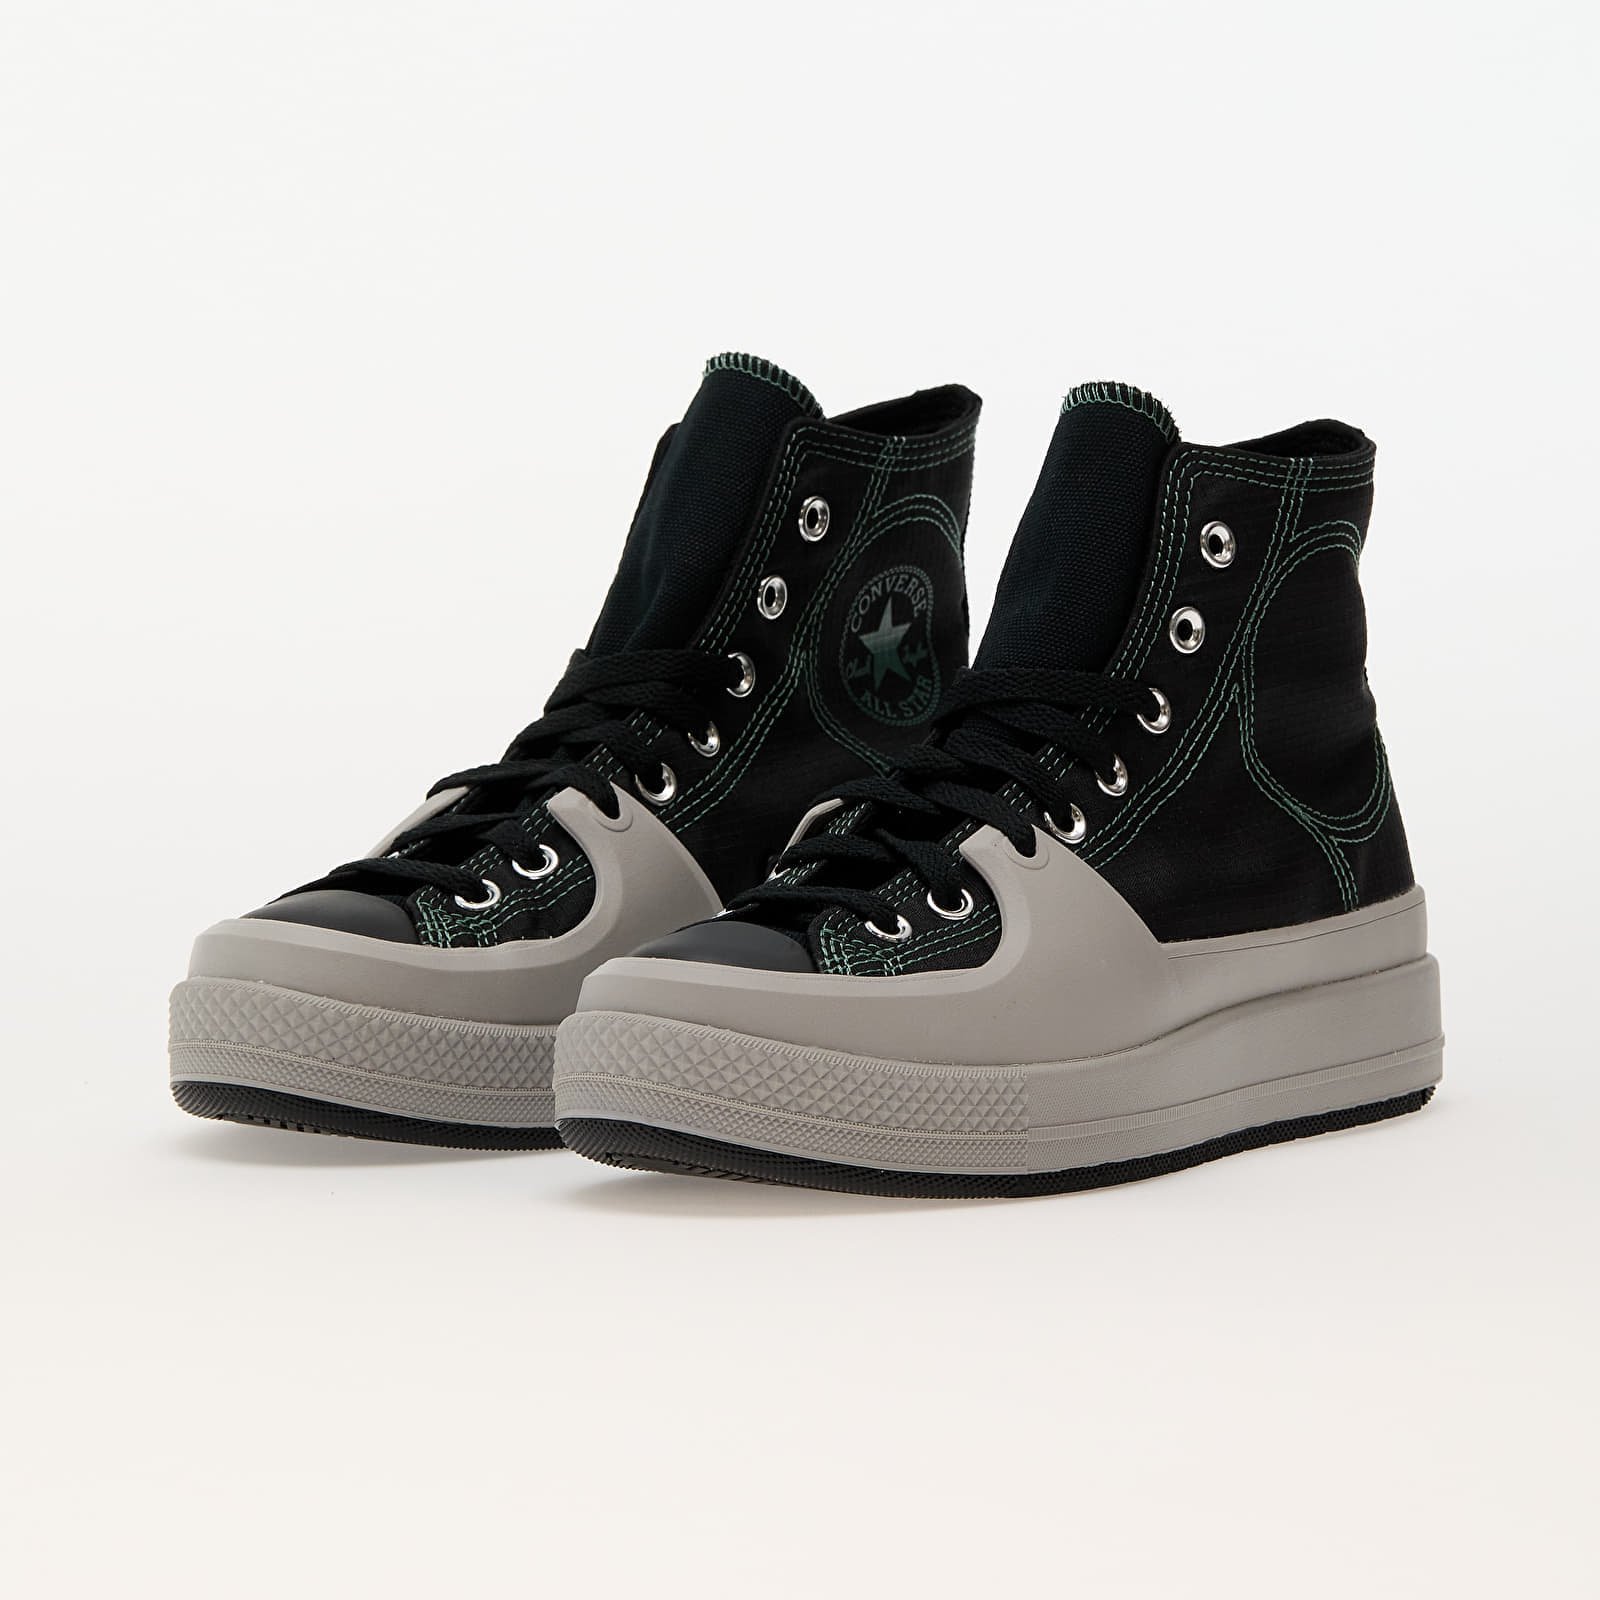 Chuck Taylor All Star Construct Black/ Totally Neutral